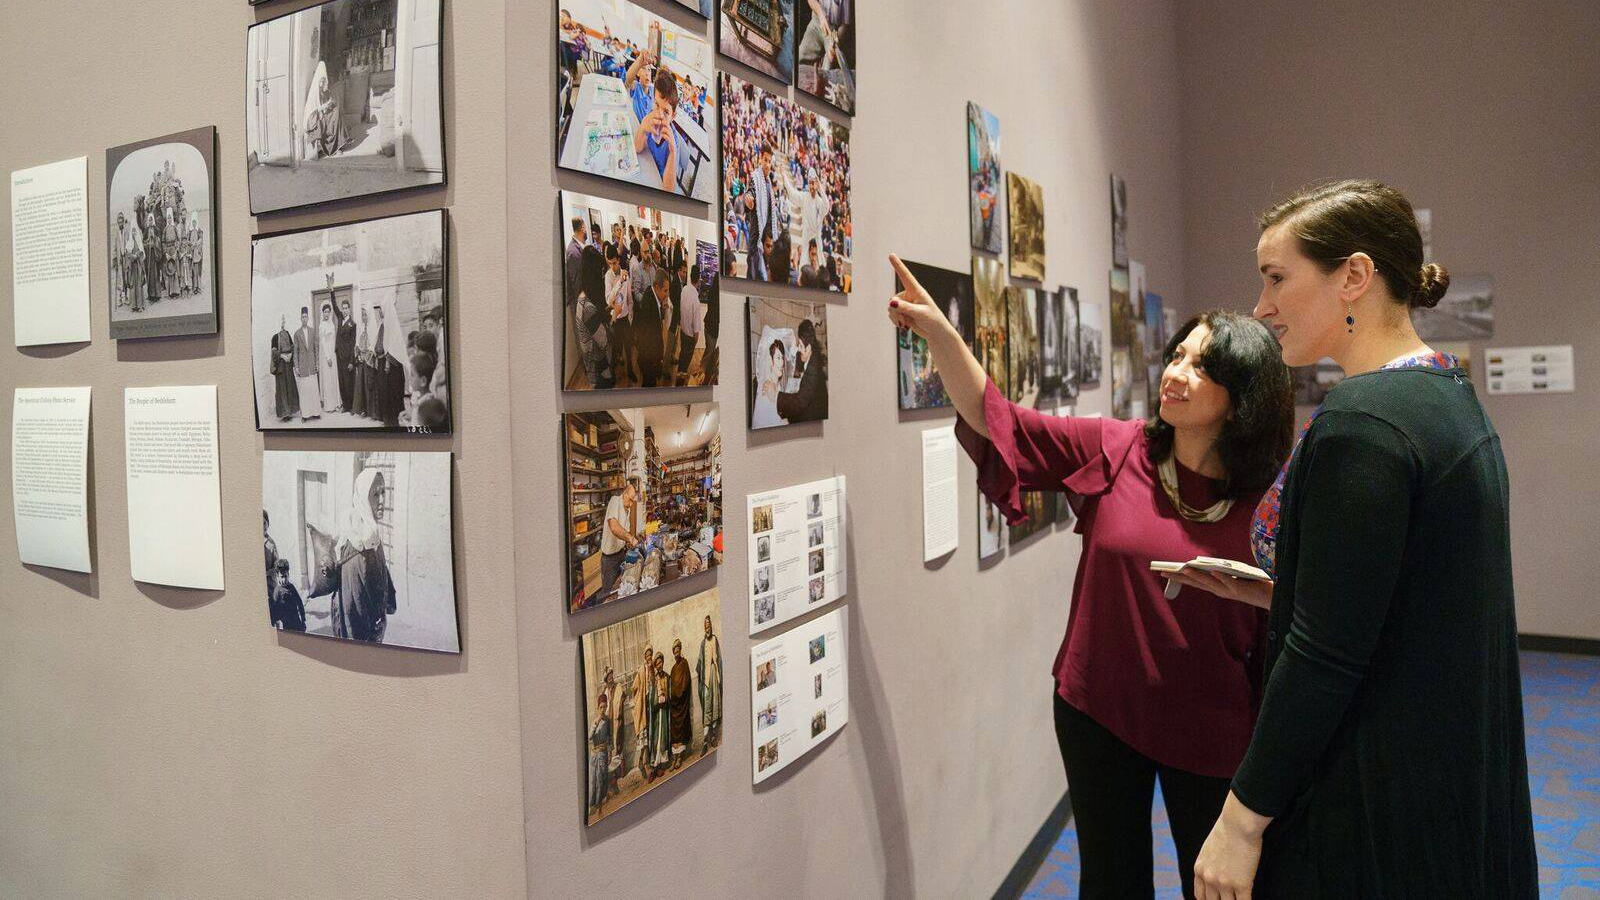 Fakhira Halloun shows a guest around the Museum of the Palestinian People. Her arm is raised pointing to photos on a wall.